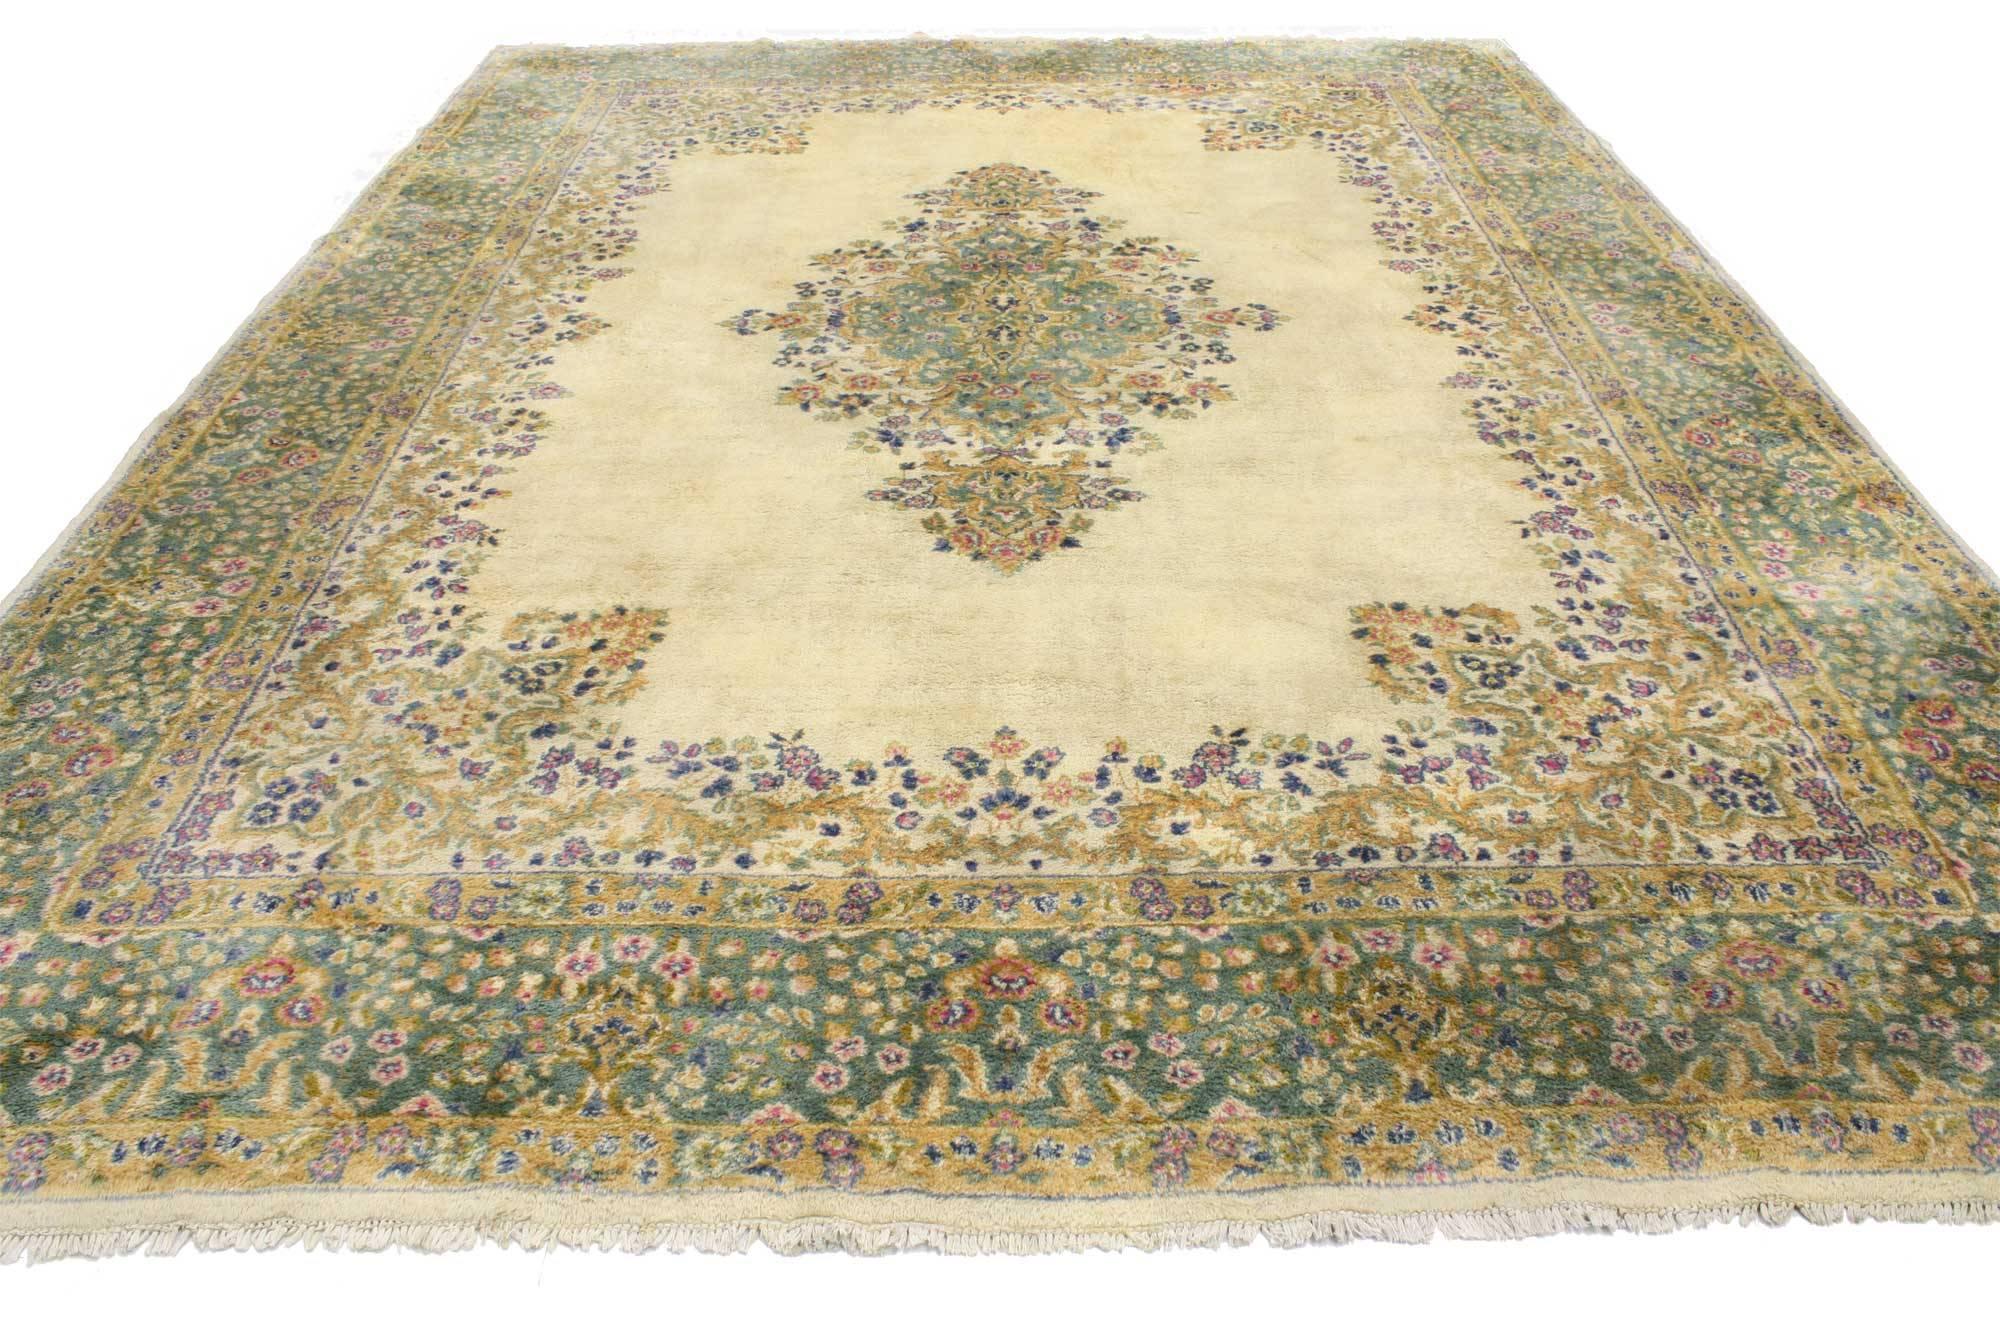 76735 Vintage Persian Kerman, Persian Kirman Area rug 09'00 x 12'01. From casual elegance to fresh and formal, relish the refinement in this hand-knotted wool vintage Persian Kerman rug (Kirman) rug. Its soft colors evoke an air of classic comfort